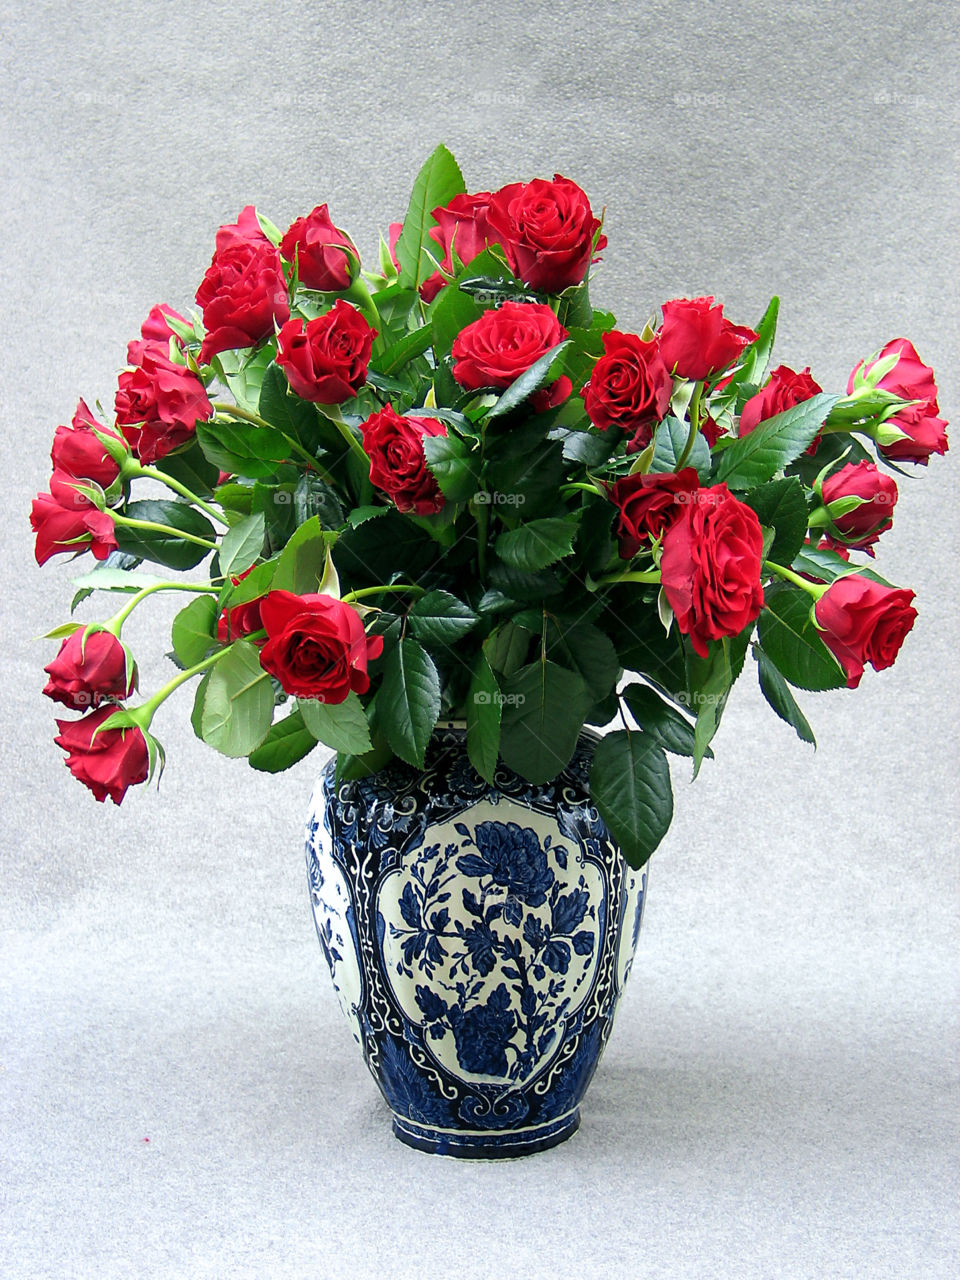 Delft vase with a bunch of roses